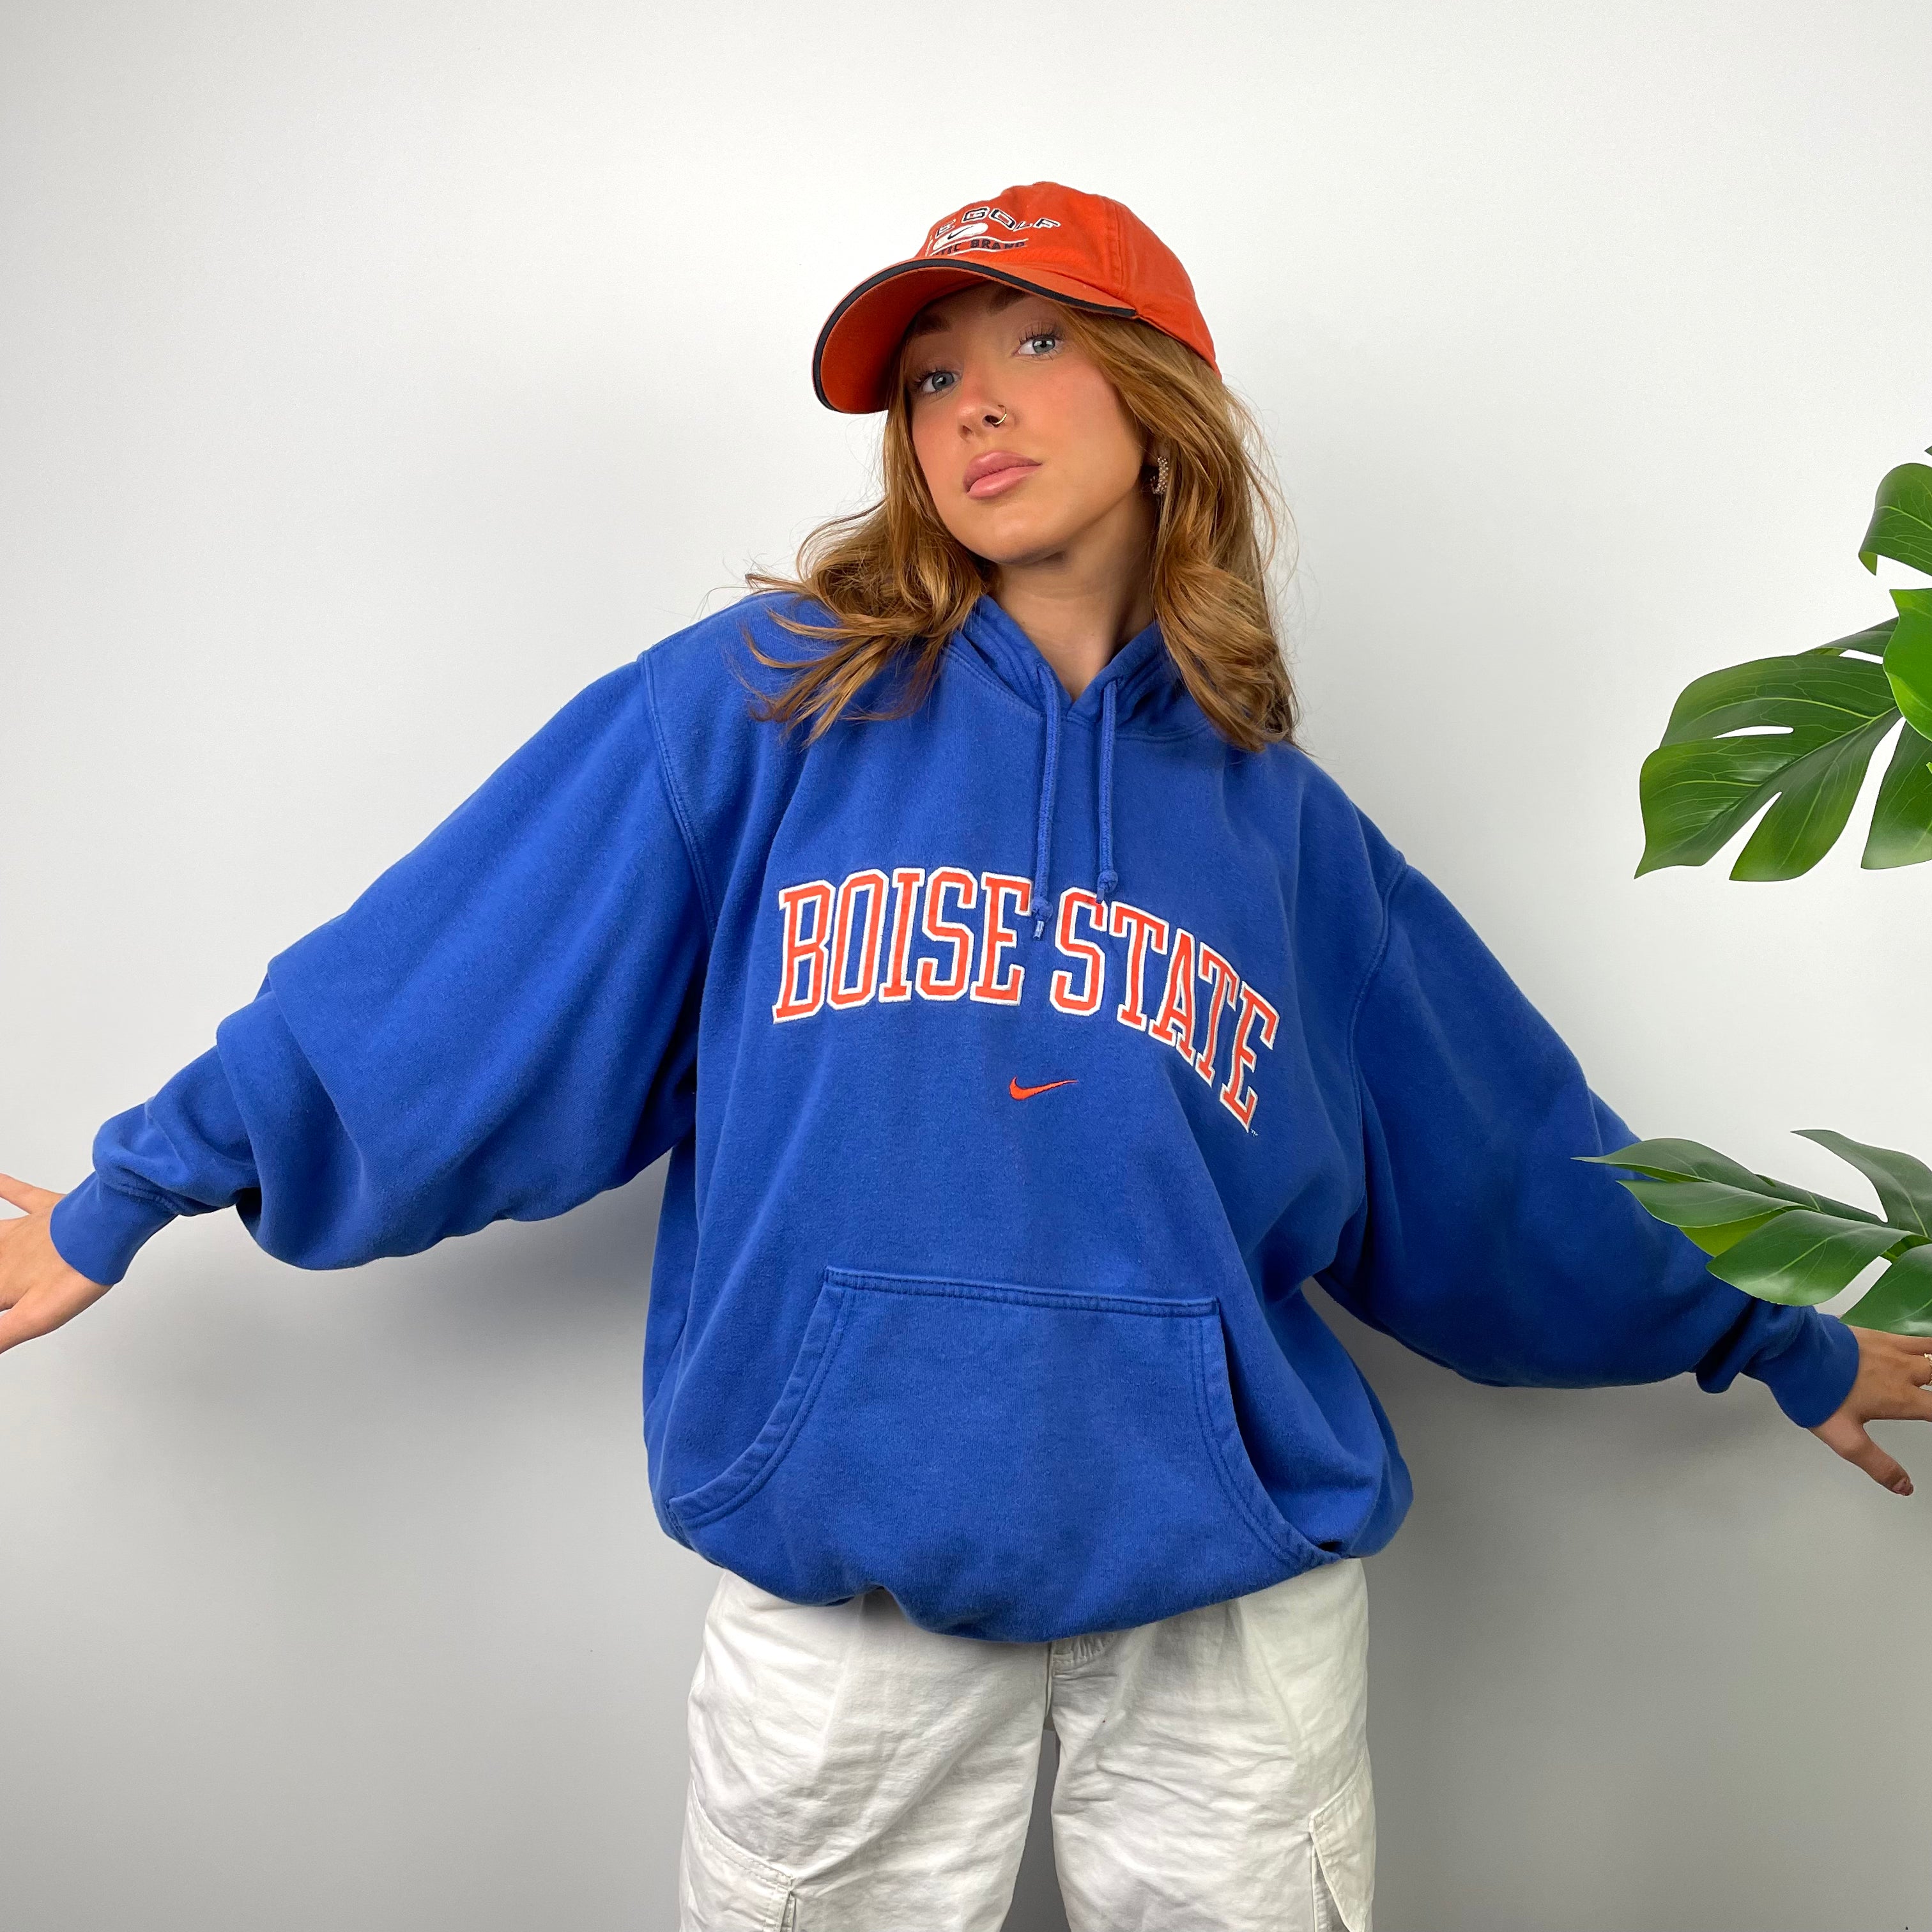 Nike x Boise State RARE Blue Embroidered Spell Out Hoodie (M)